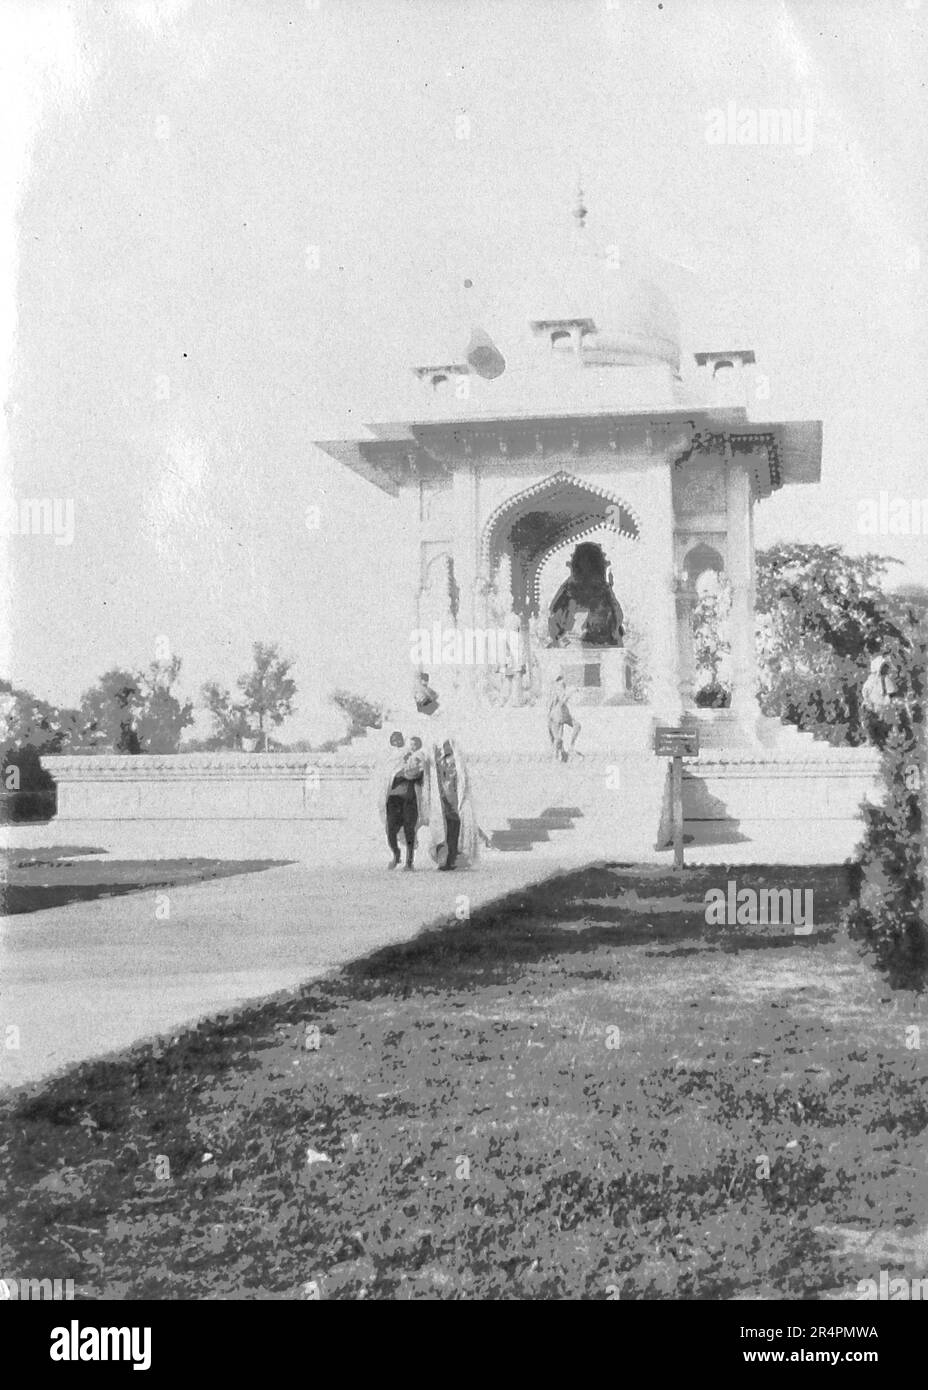 Southern India, parts of which are now known as Pakistan: Victoria Memorial in Lahore, c1918. From a series taken from the original first World War snapshot photo taken in India, c1917-19. The originals were small photographs which might look poor if enlarged too much. Stock Photo